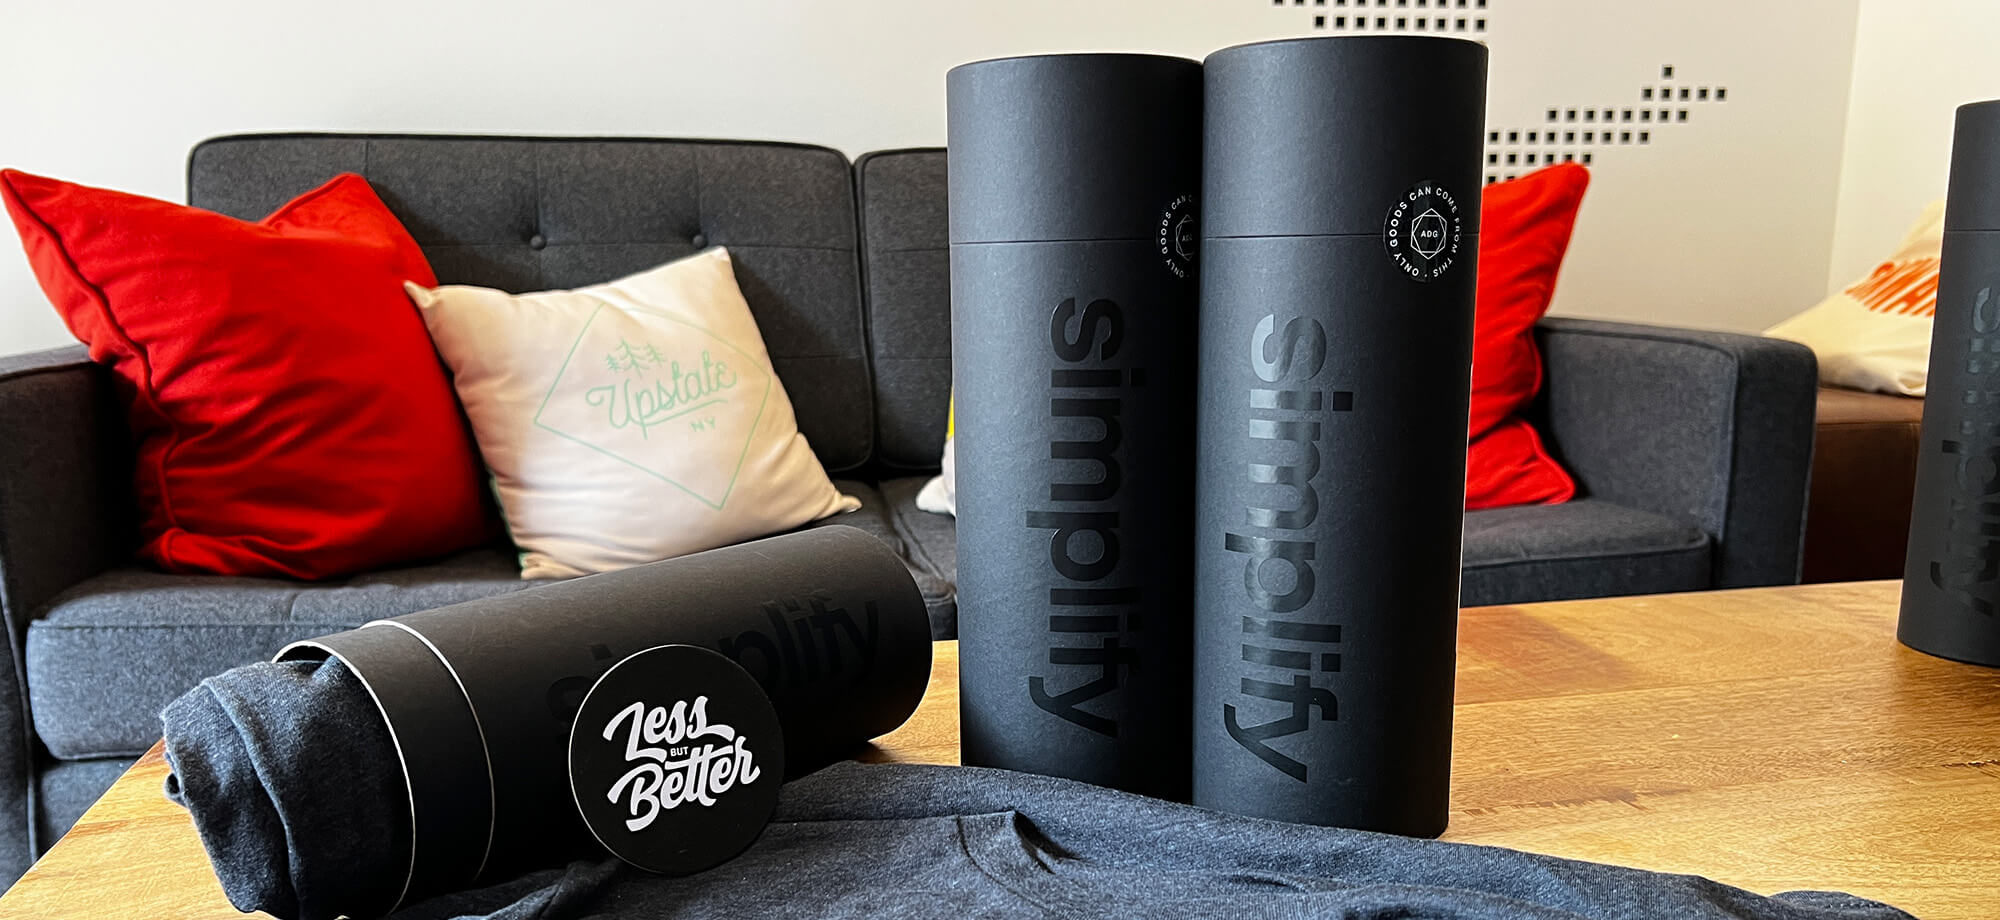 the contents of our simplify kit (tee, tube, coaster that says “Less but Better” on a coffee table in our studio